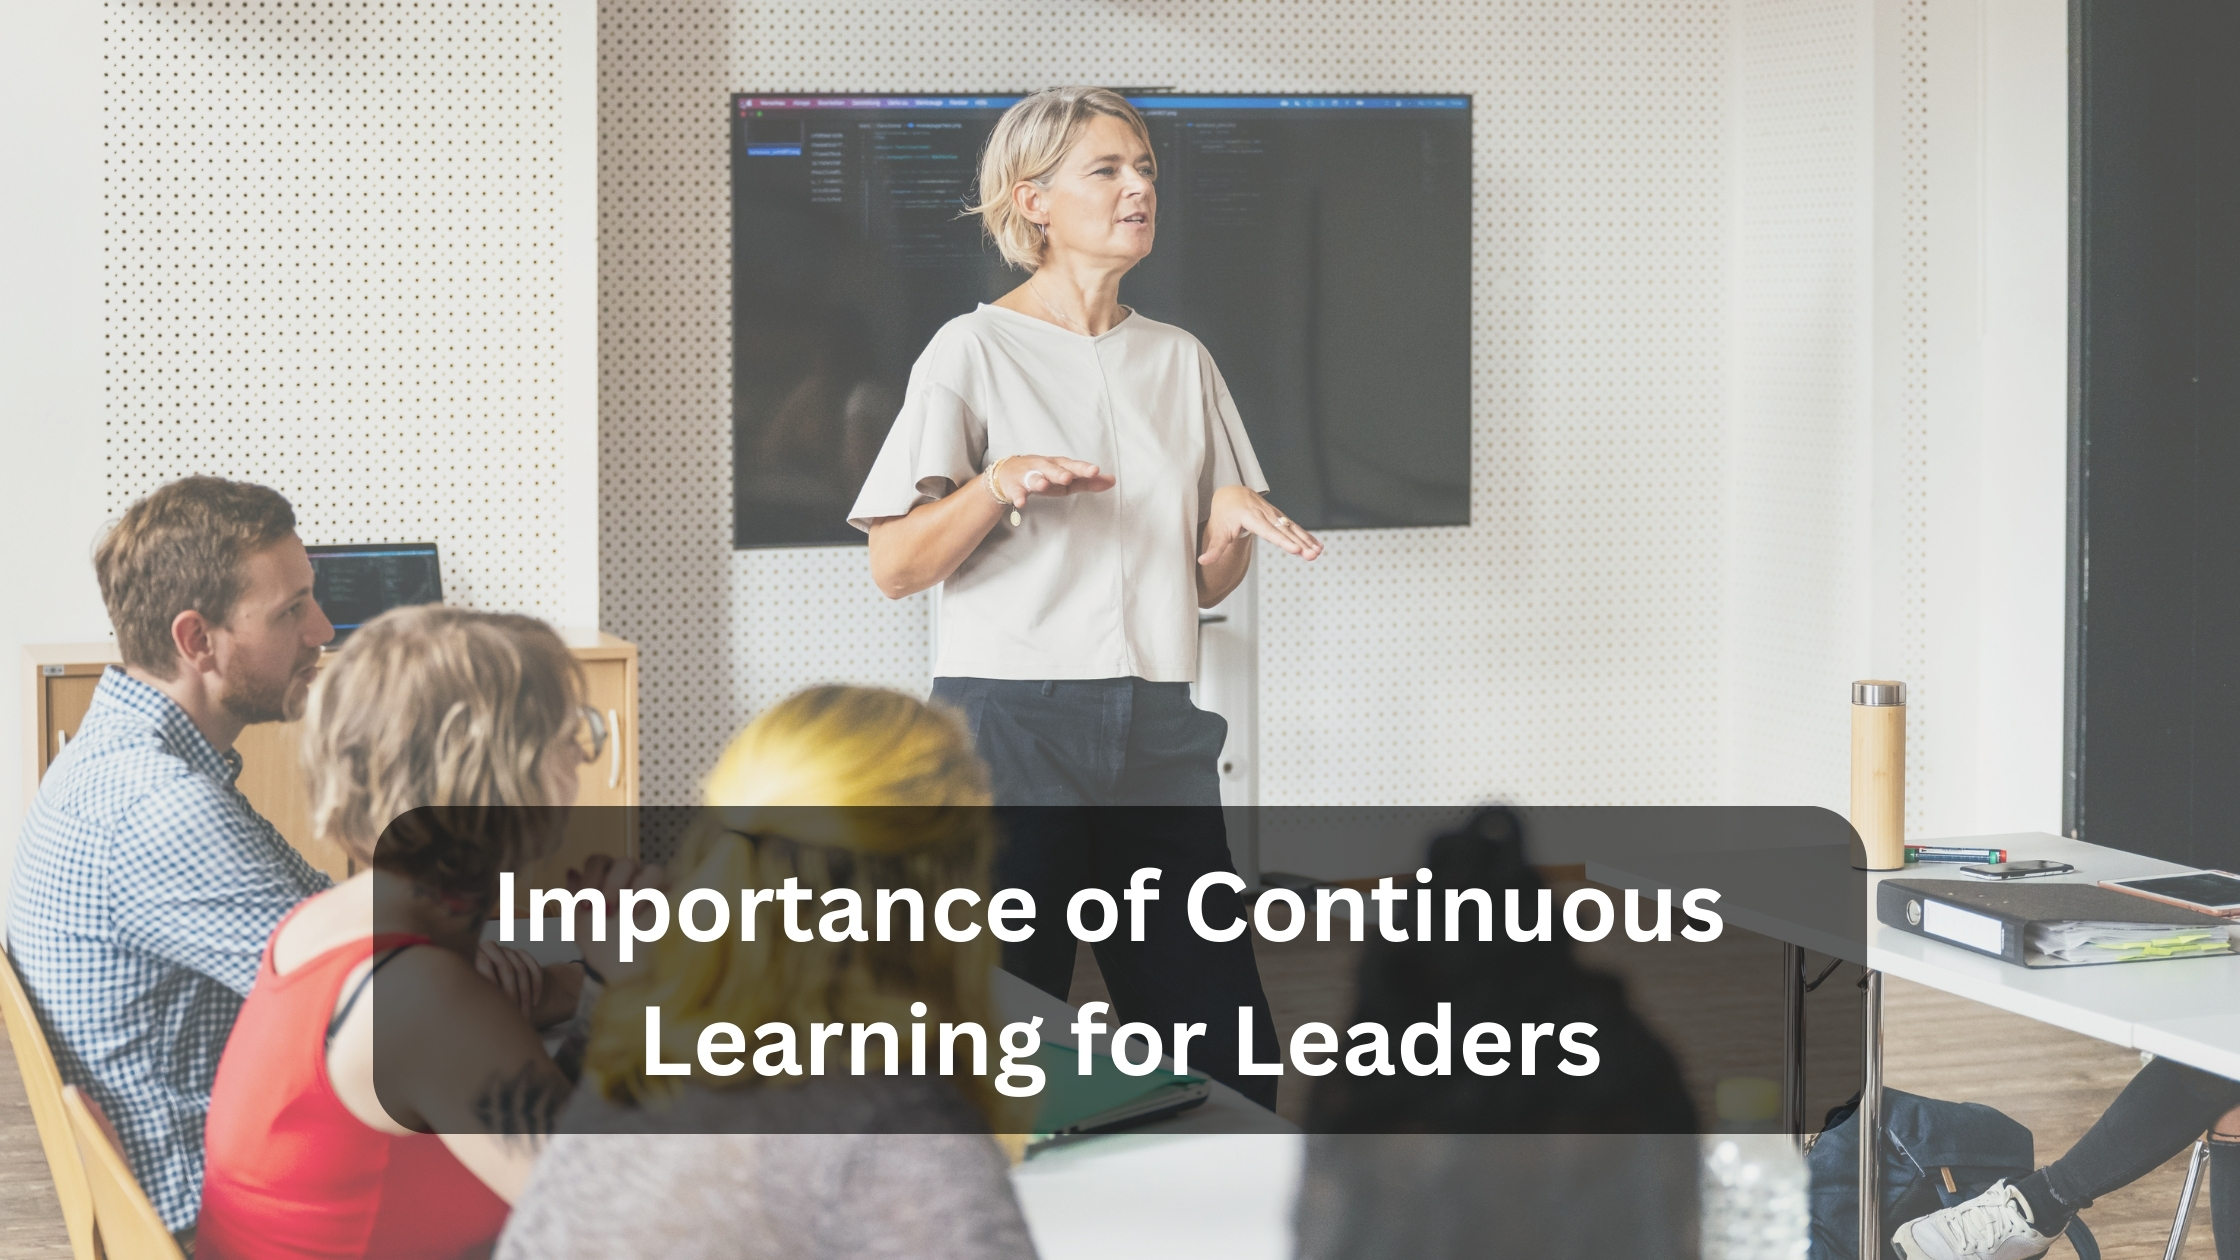 Importance of continuous learning for leaders